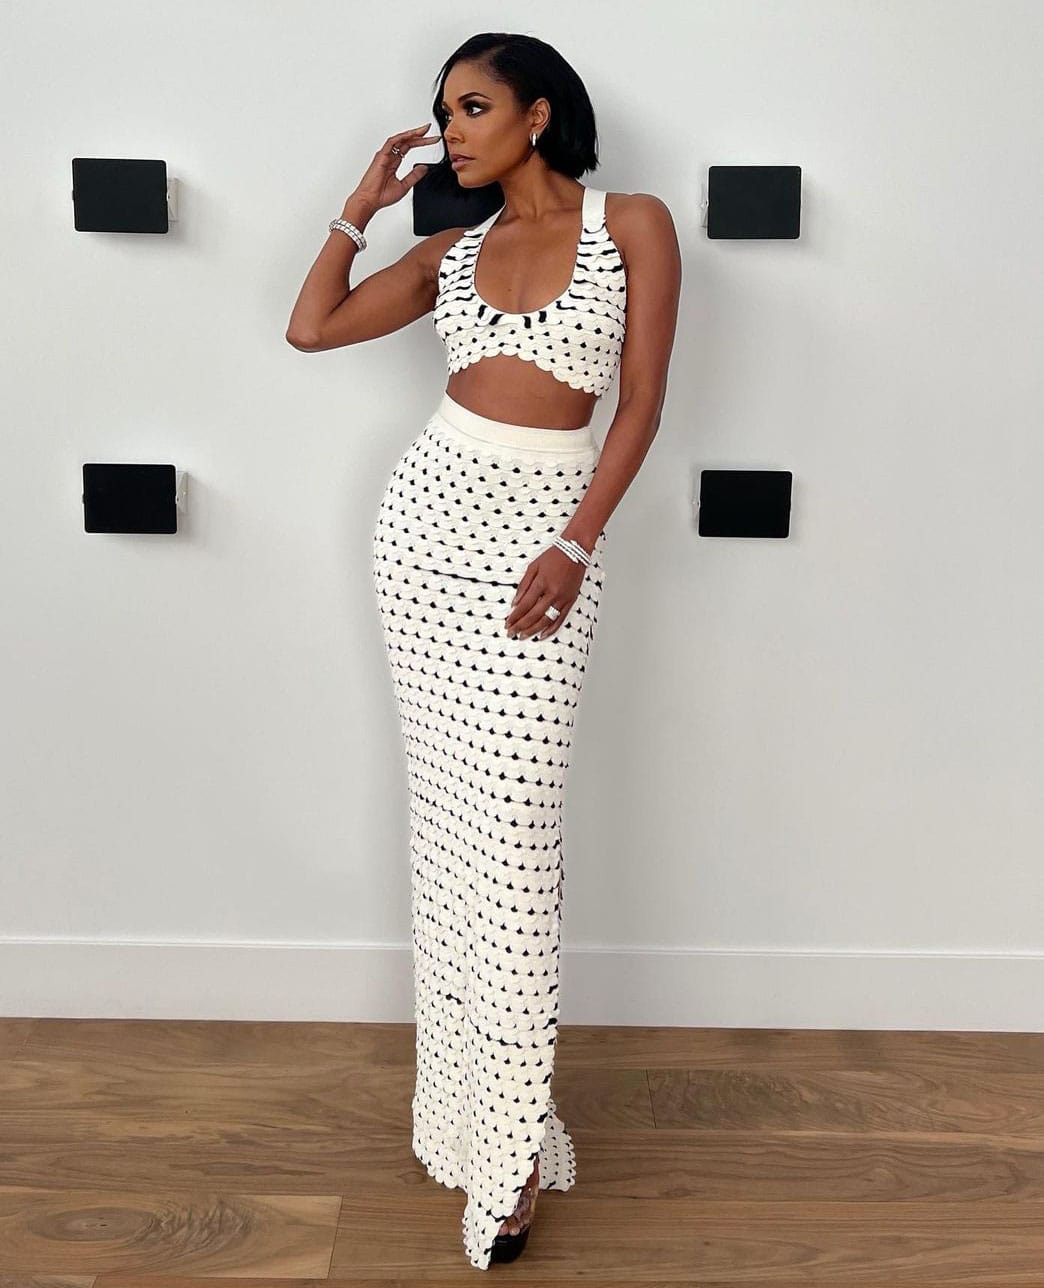 Gabrielle Union shows off her figure in Altuzarra’s Fall 2022 scalloped crop top and maxi skirt at Cheaper by the Dozen Los Angeles premiere on March 16, 2022